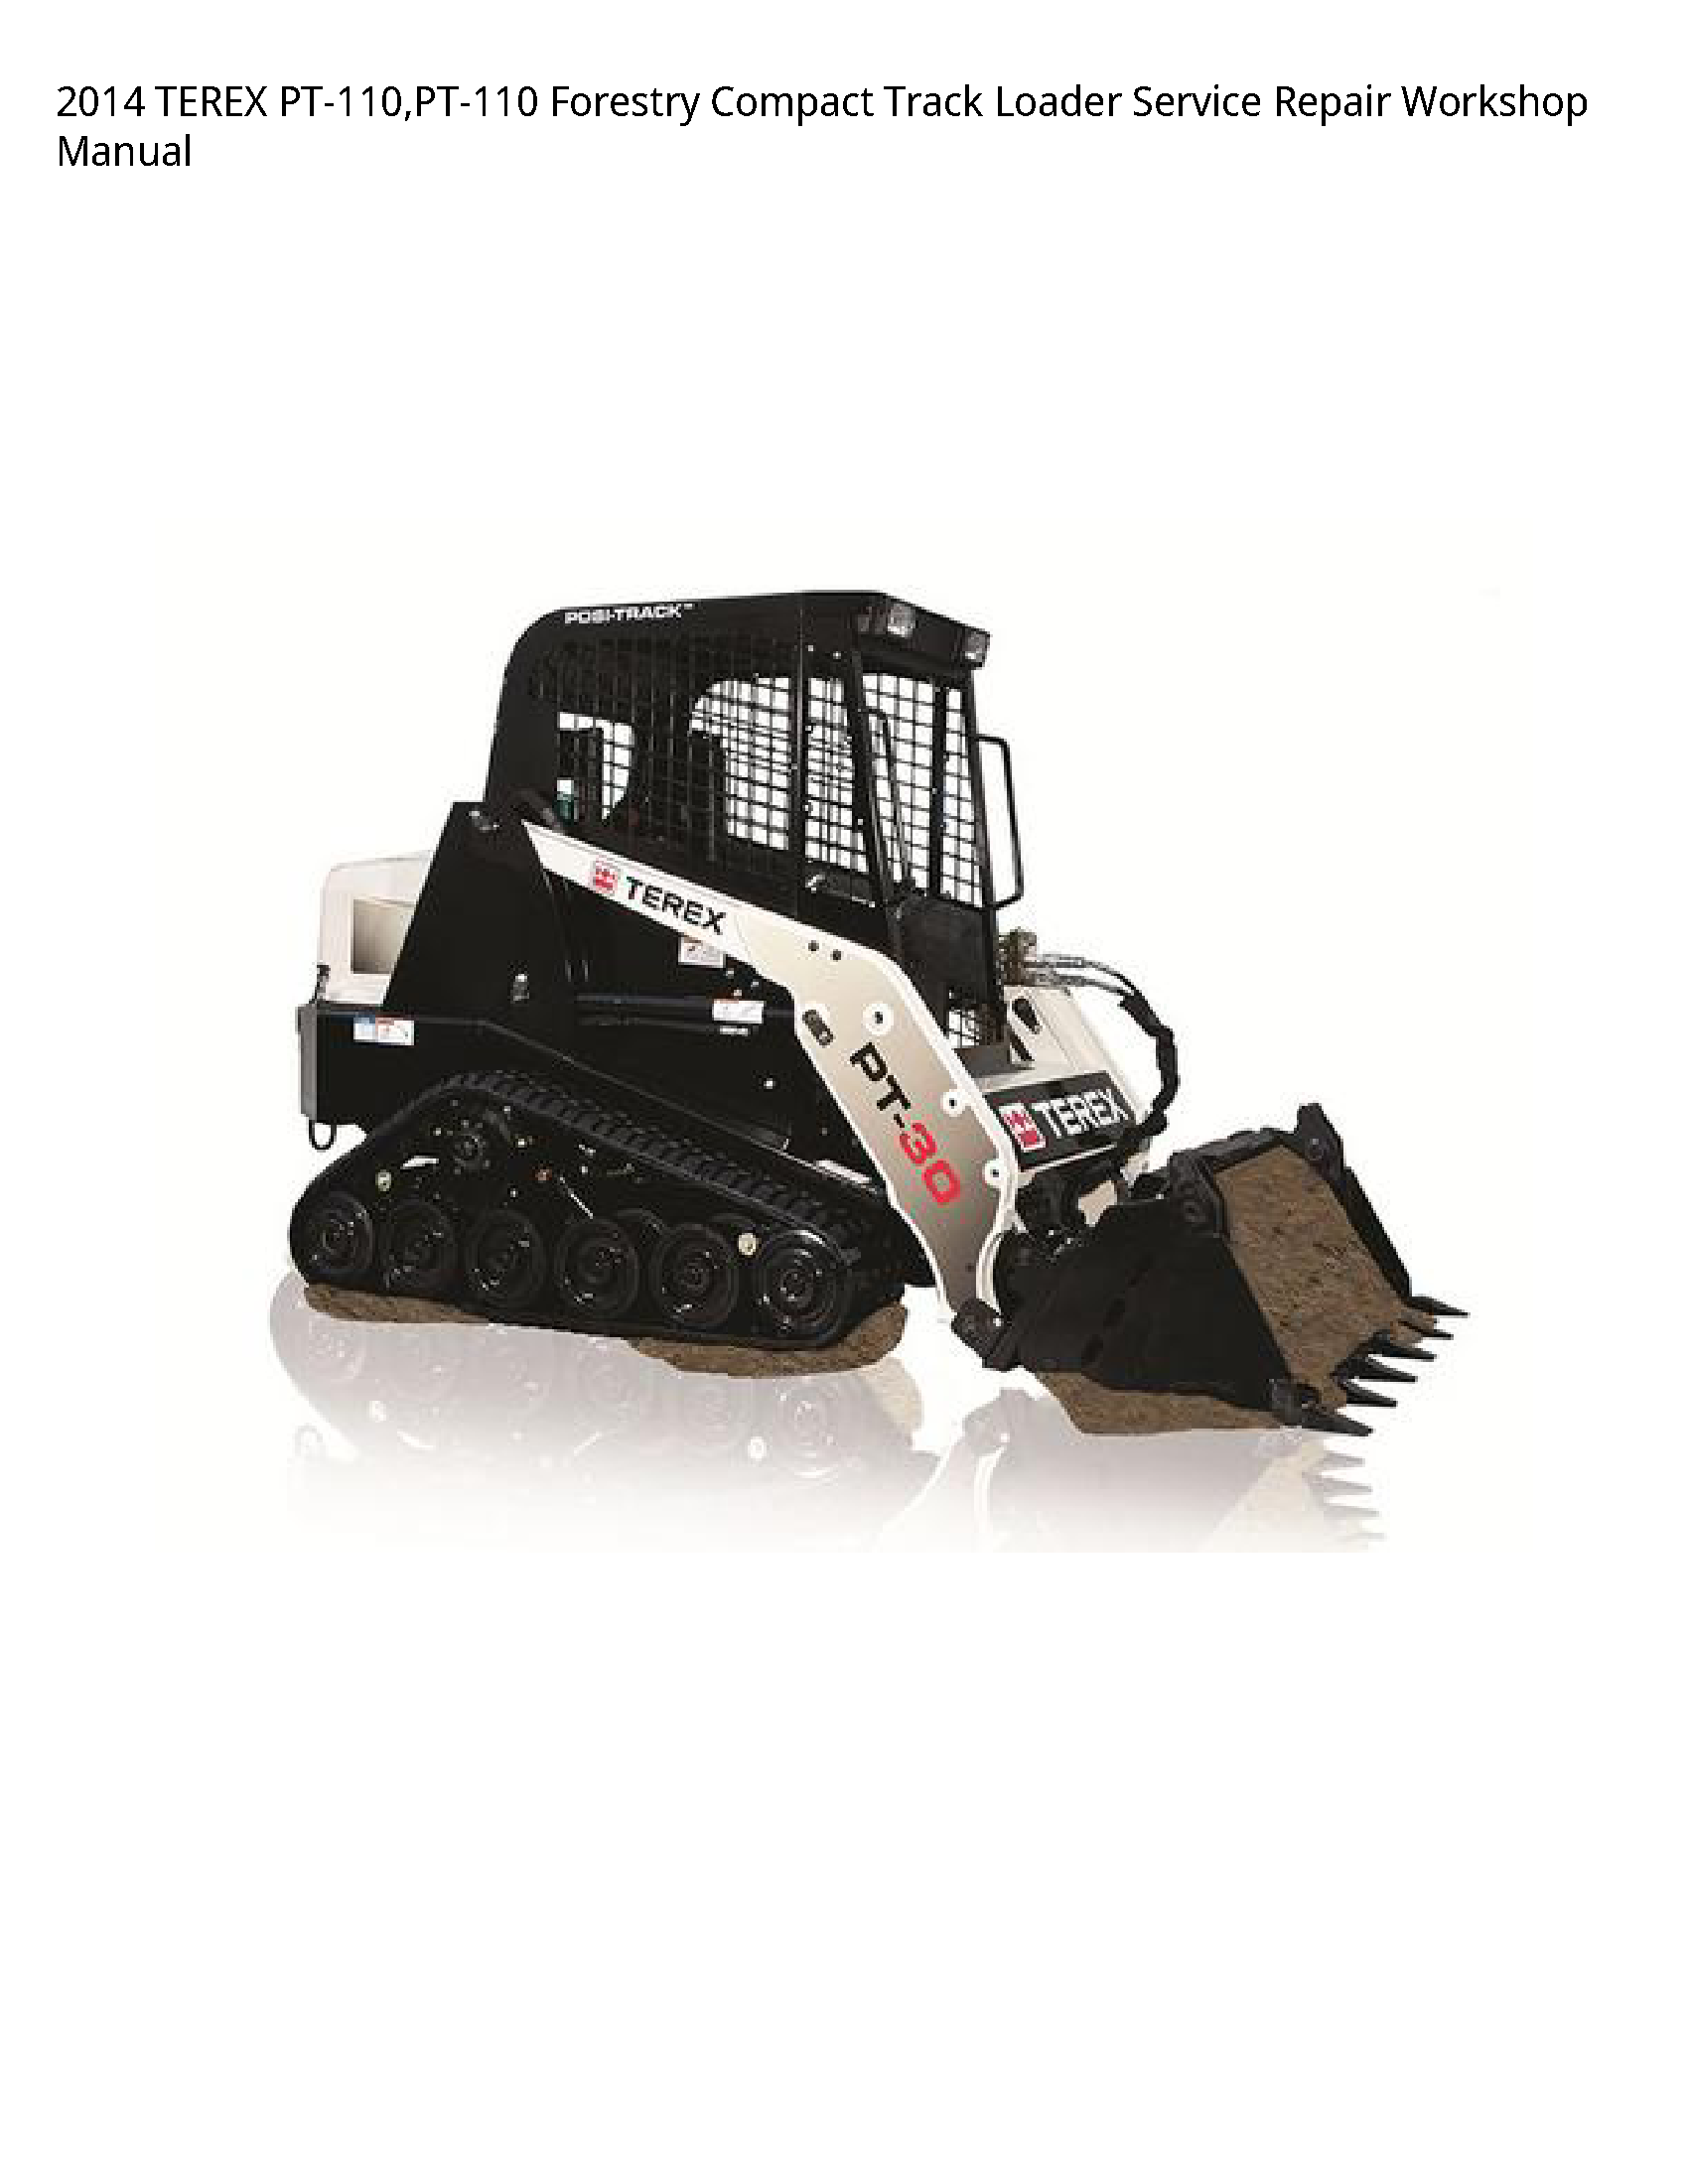 Terex PT-110 Forestry Compact Track Loader manual